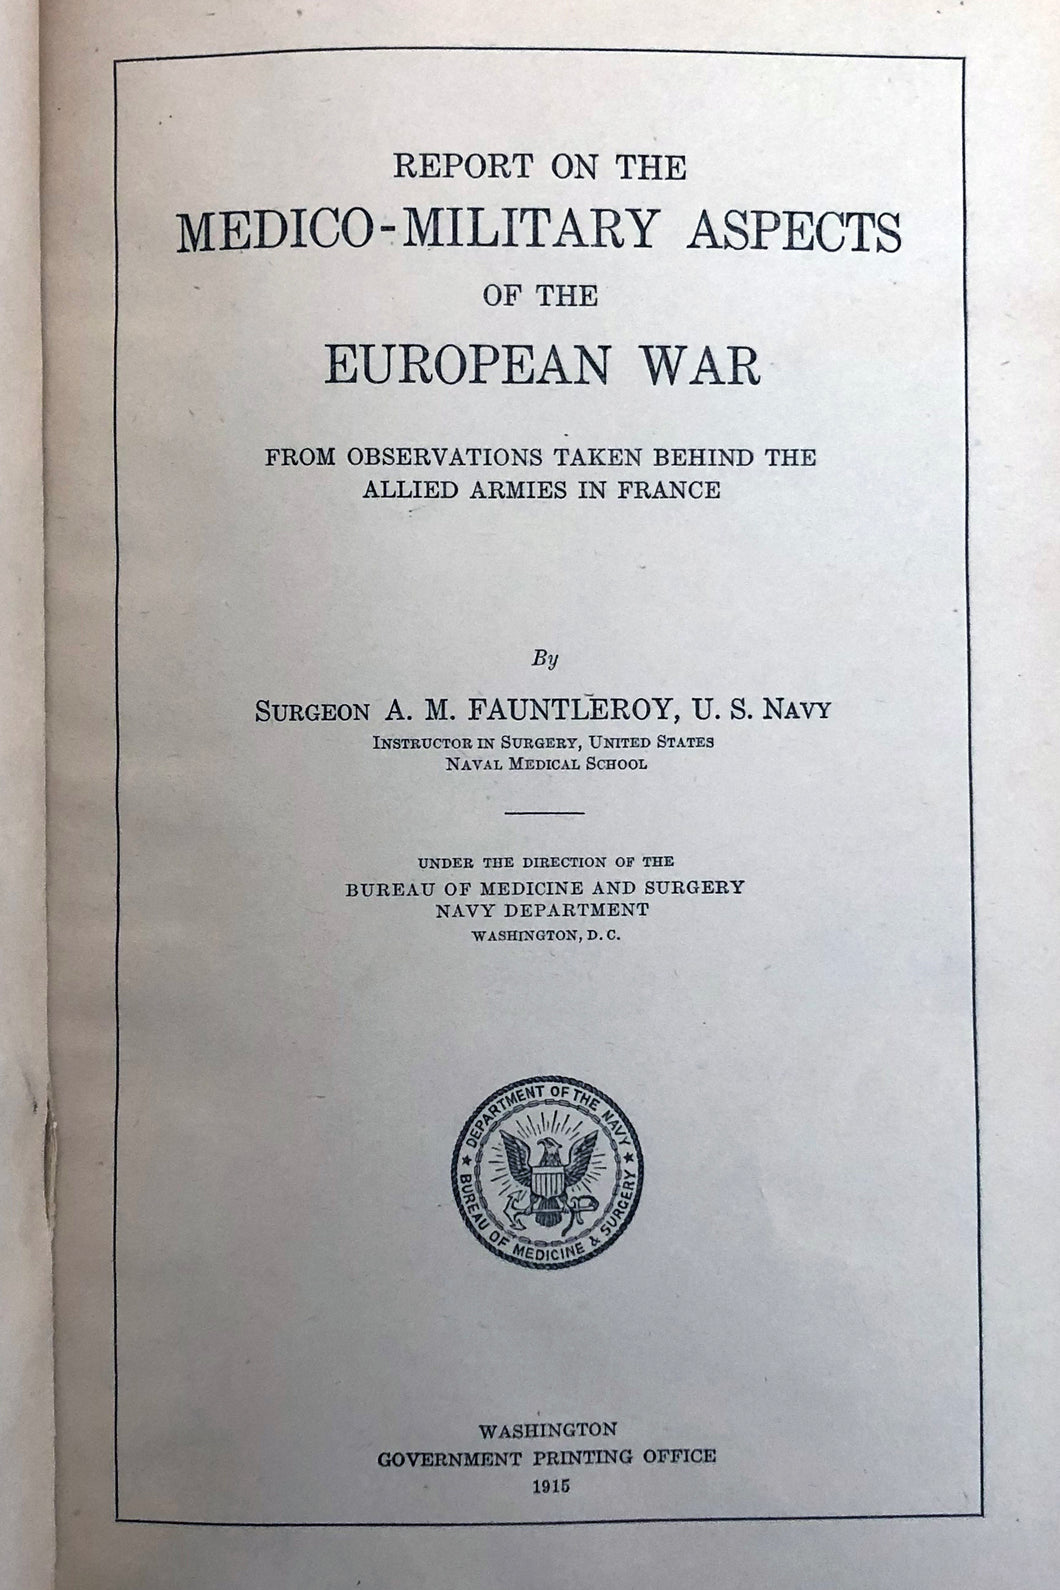 Report on the medico-military aspects of the European War from observations taken behind the allied armies in France